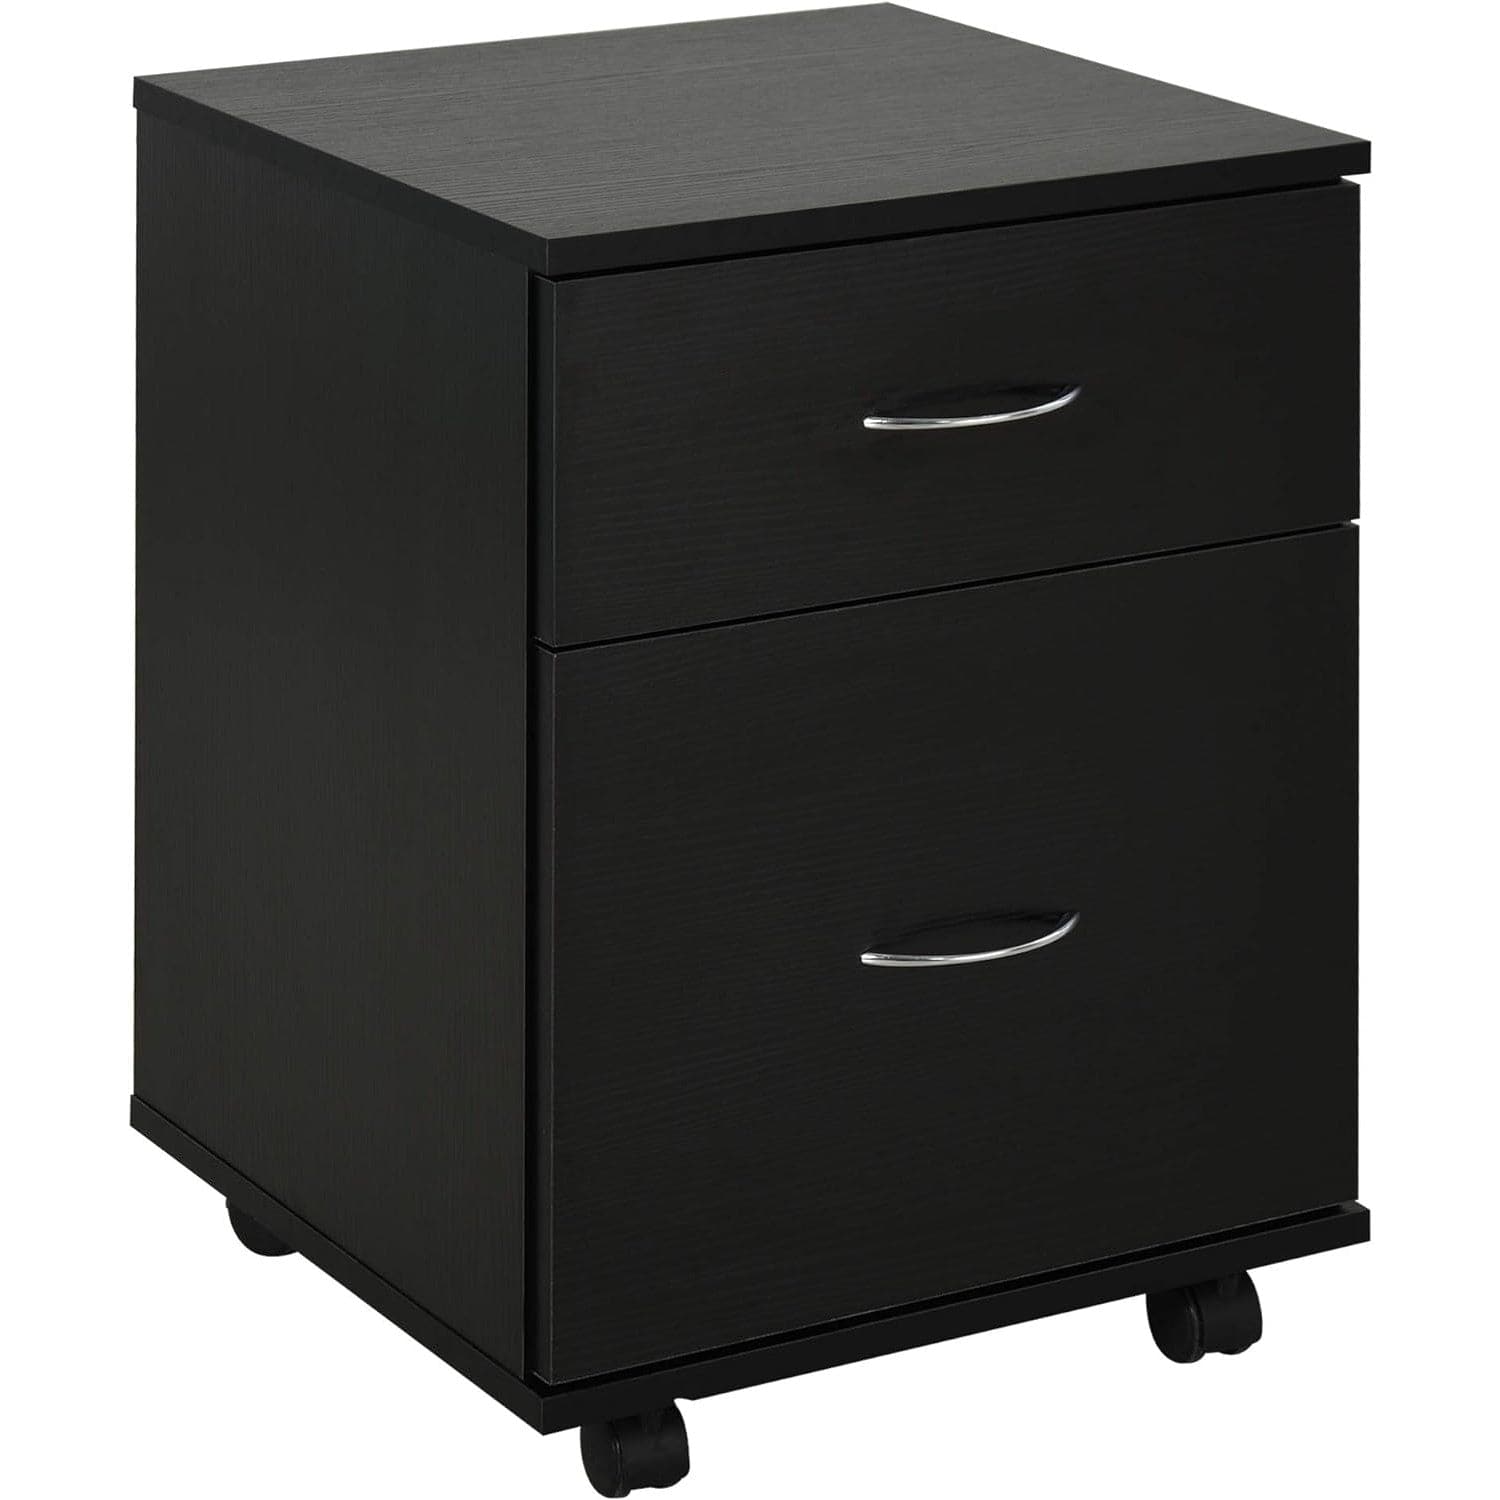 ProperAV Extra 2 Drawer Filing Cabinet Cupboard with Wheels (Black)